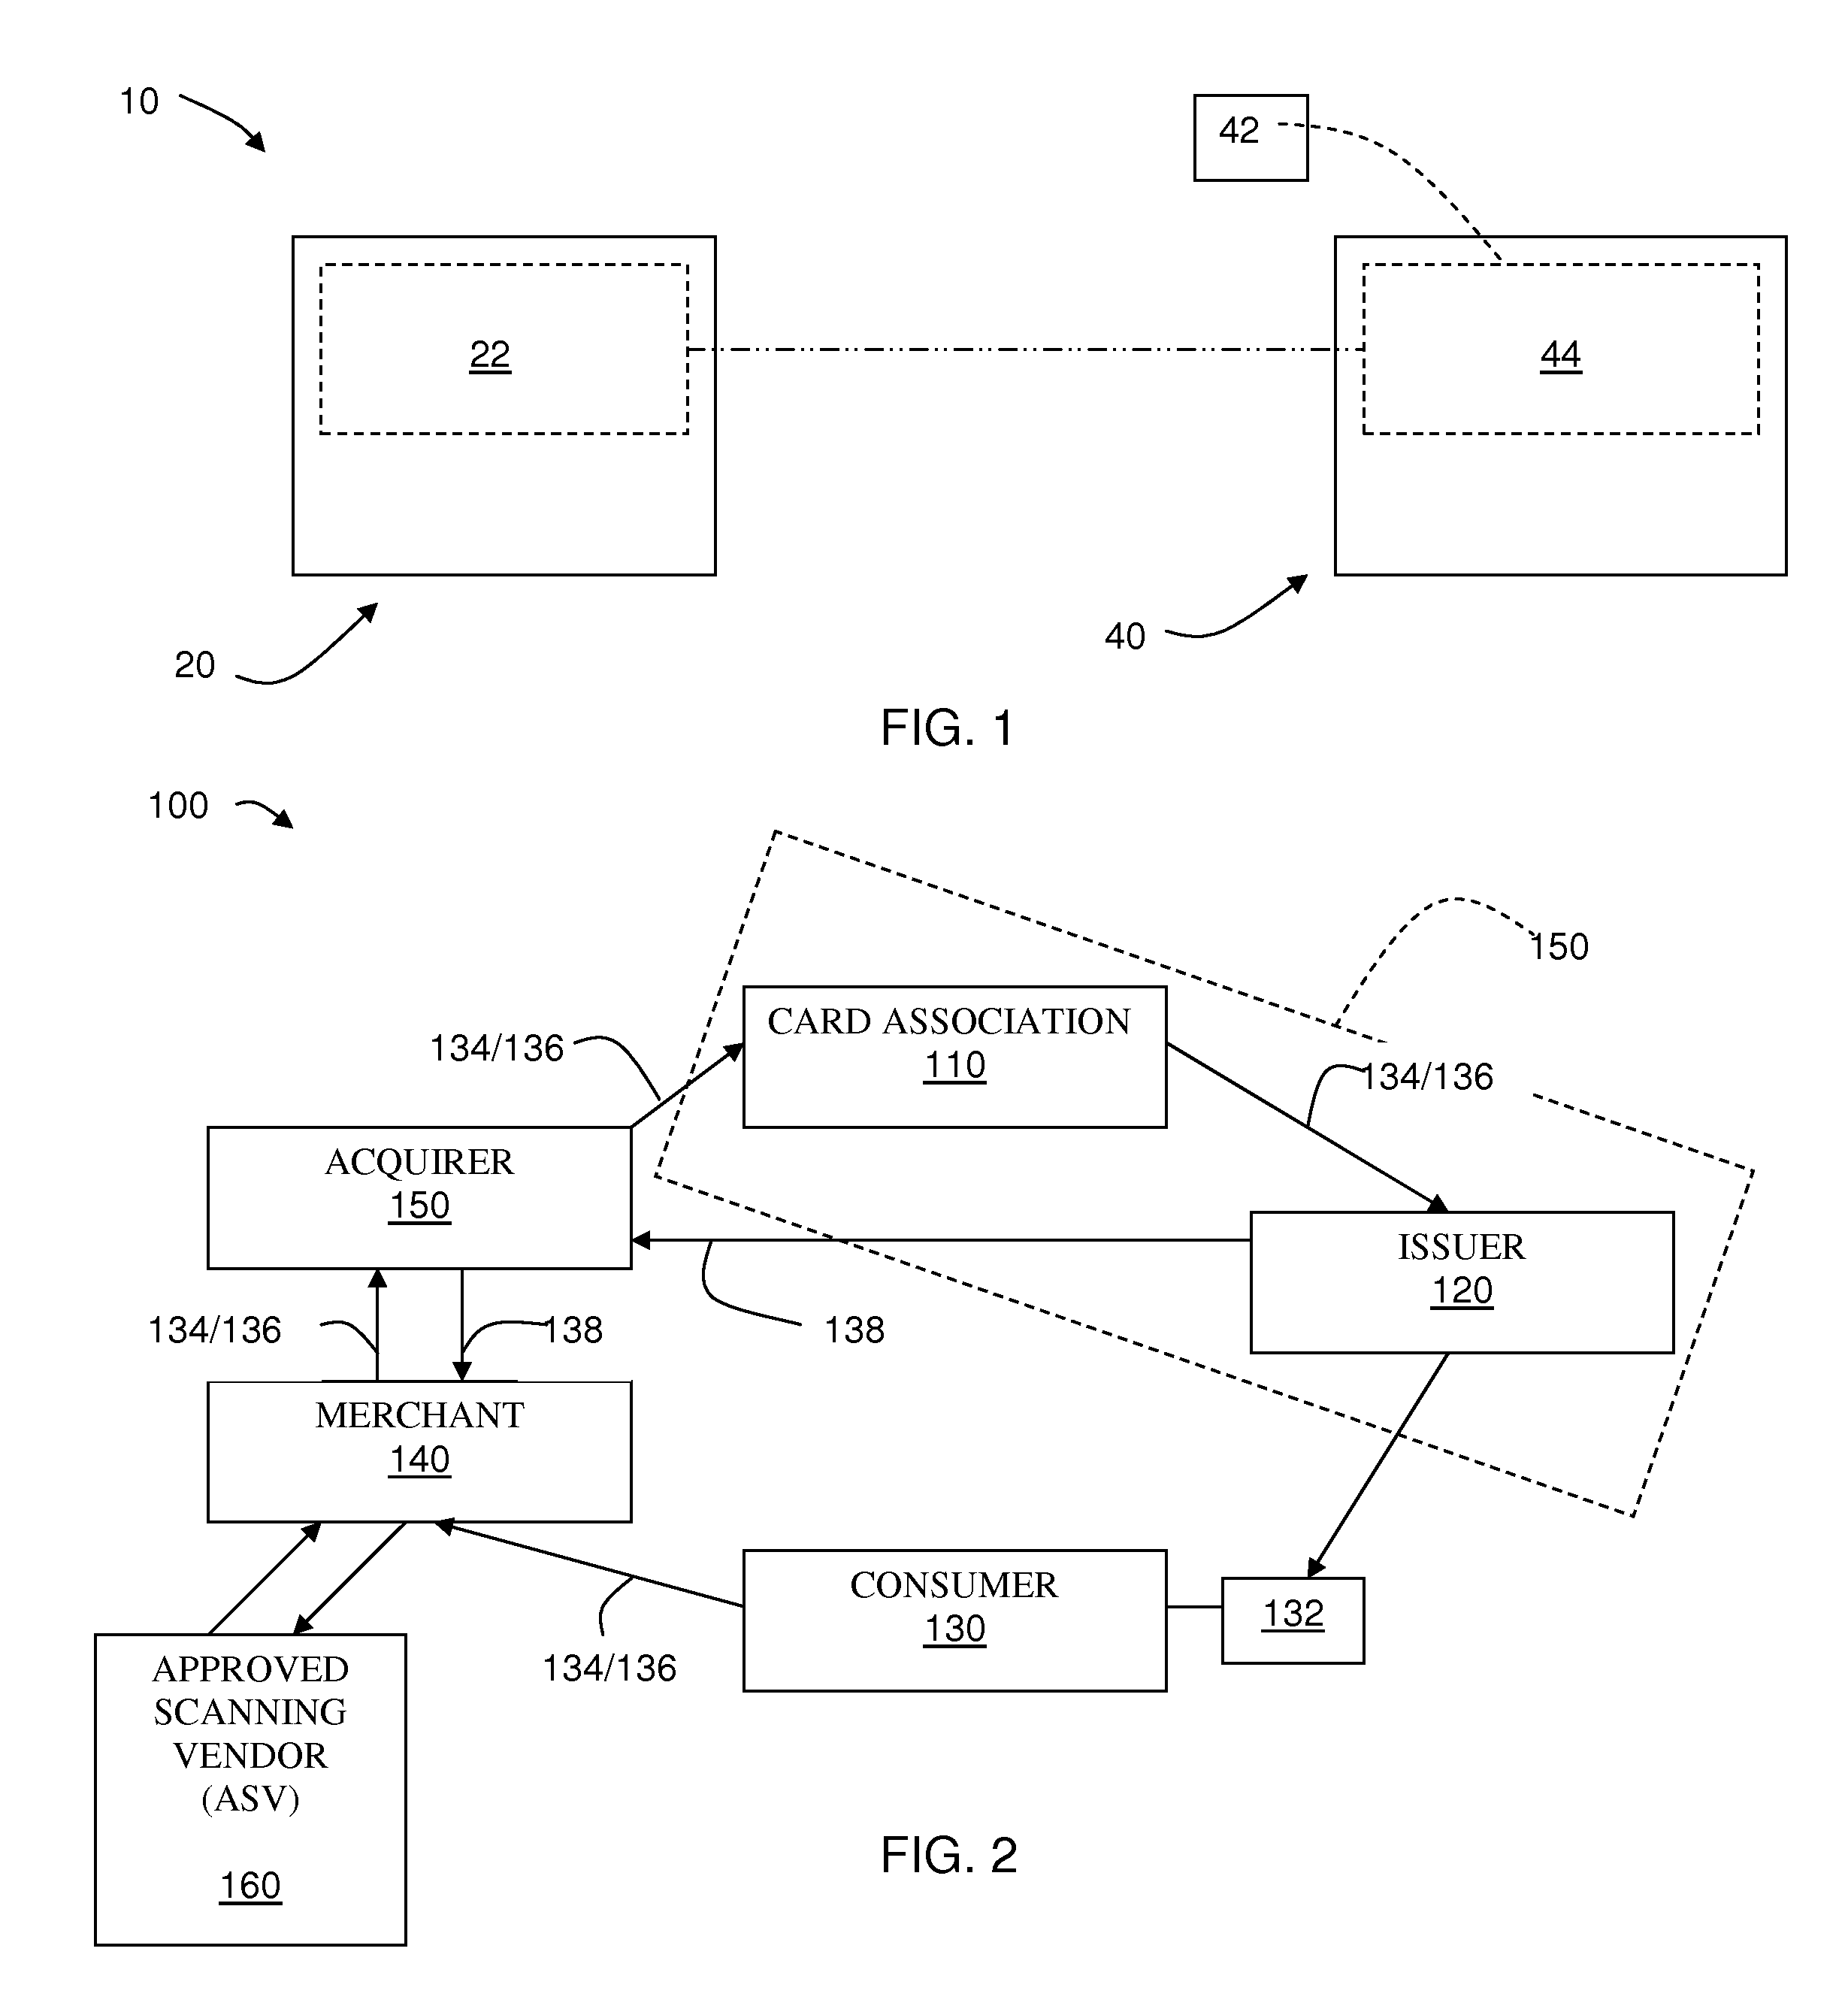 Systems and methods employing searches for known identifiers of sensitive information to identify sensitive information in data